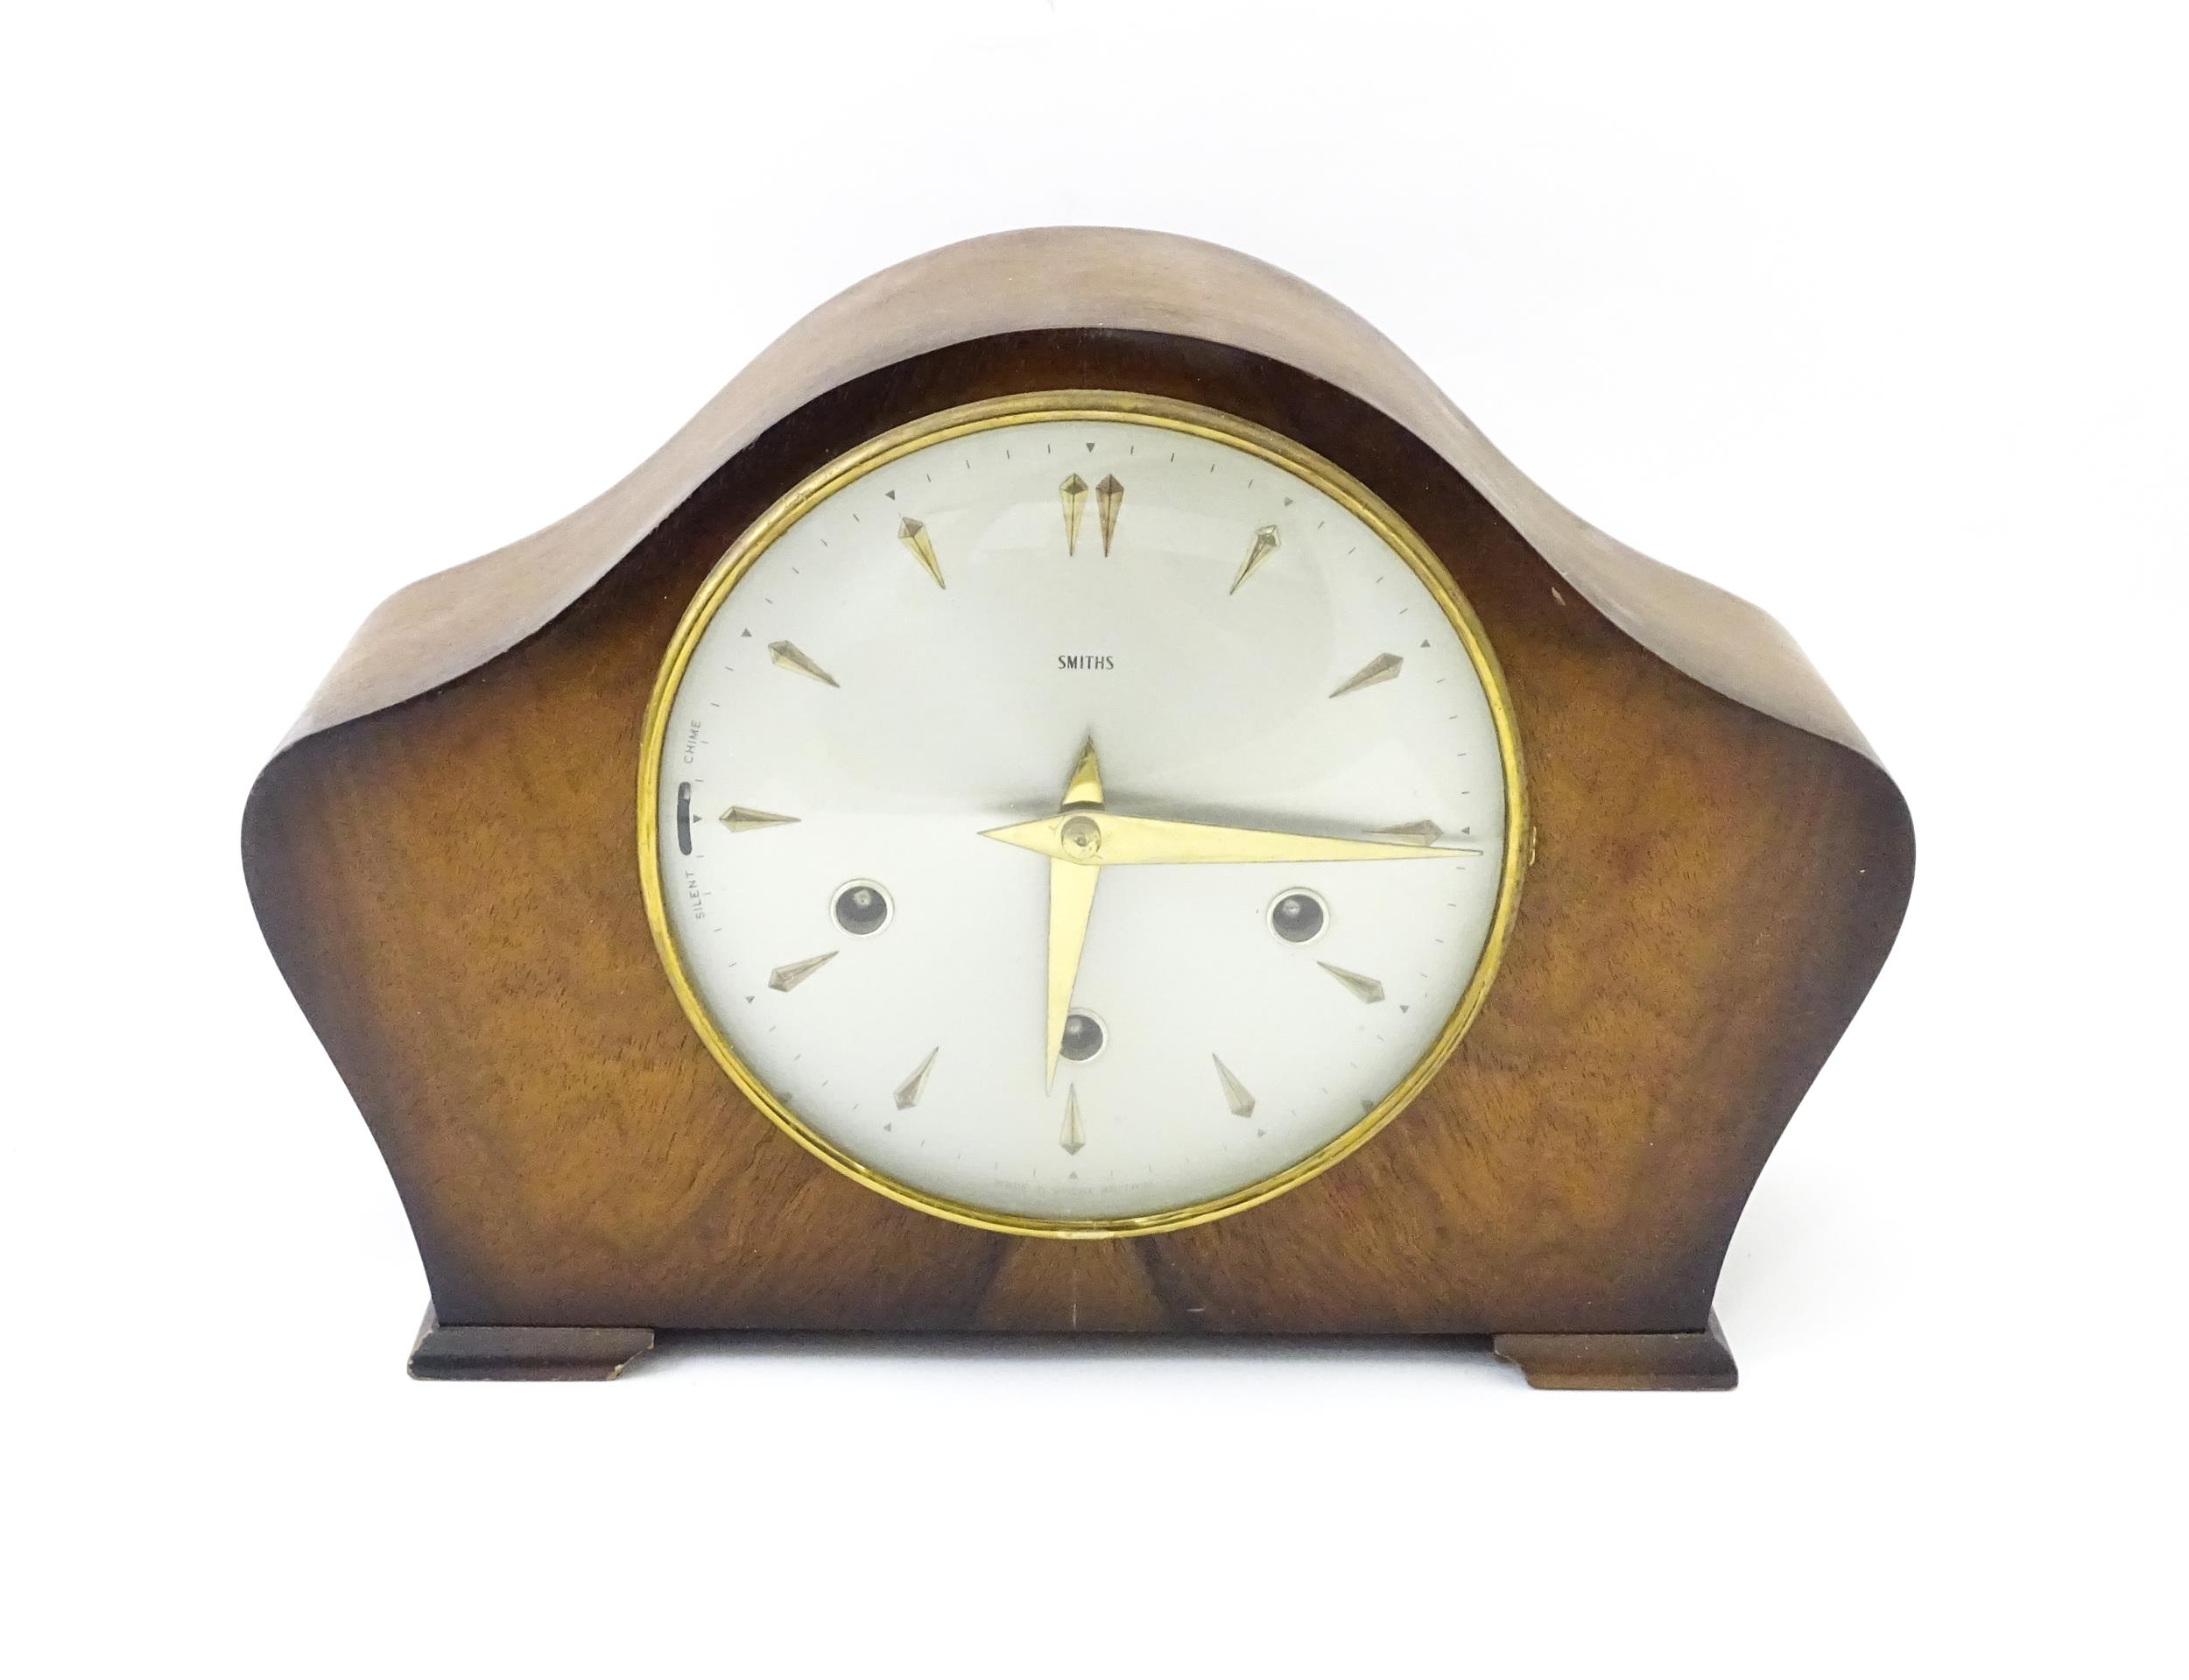 A 20thC smiths walnut cased mantle clock with chiming movement. Approx. 8" high Please Note - we